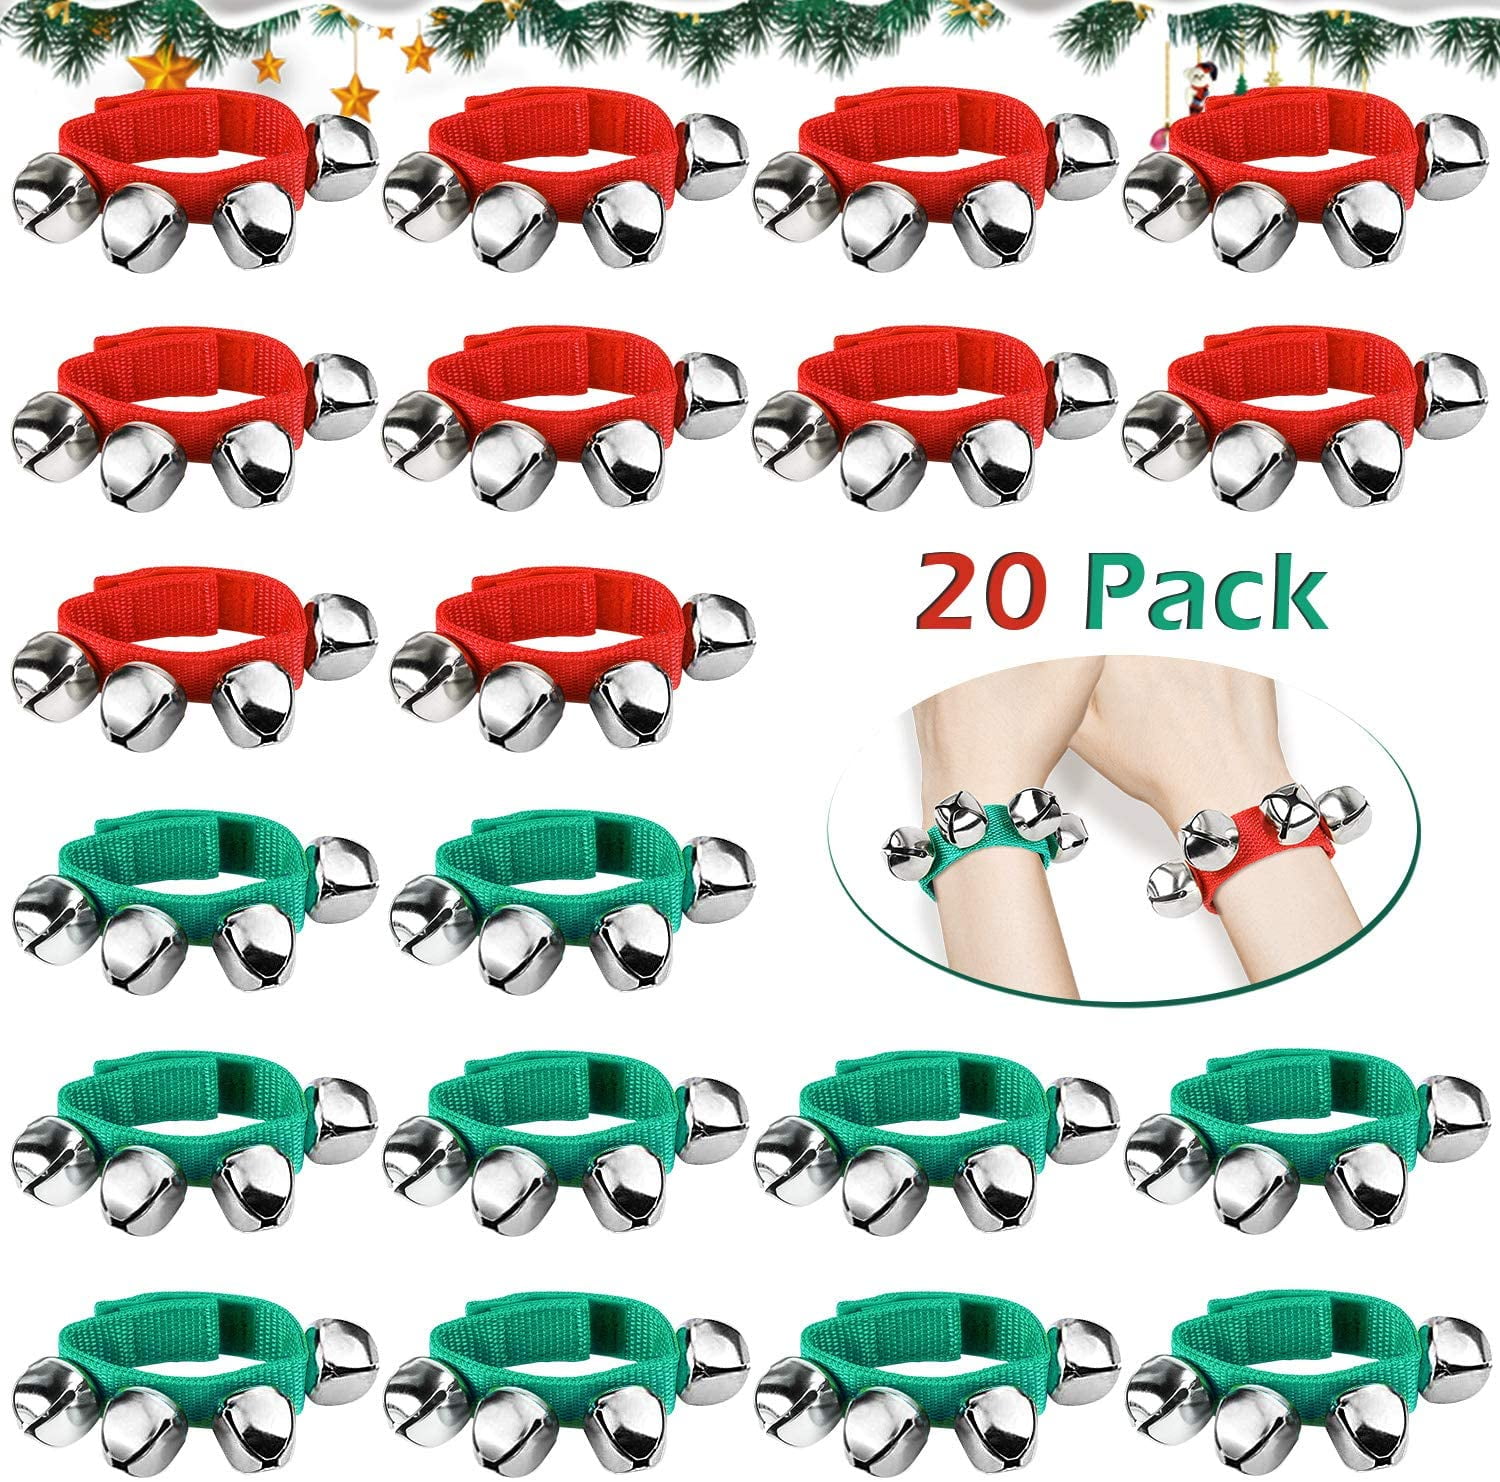 20PCS Christmas Wrist Band Jingle Bells 10 Red and 10 Green Musical Instruments for Christmas Party Favors 